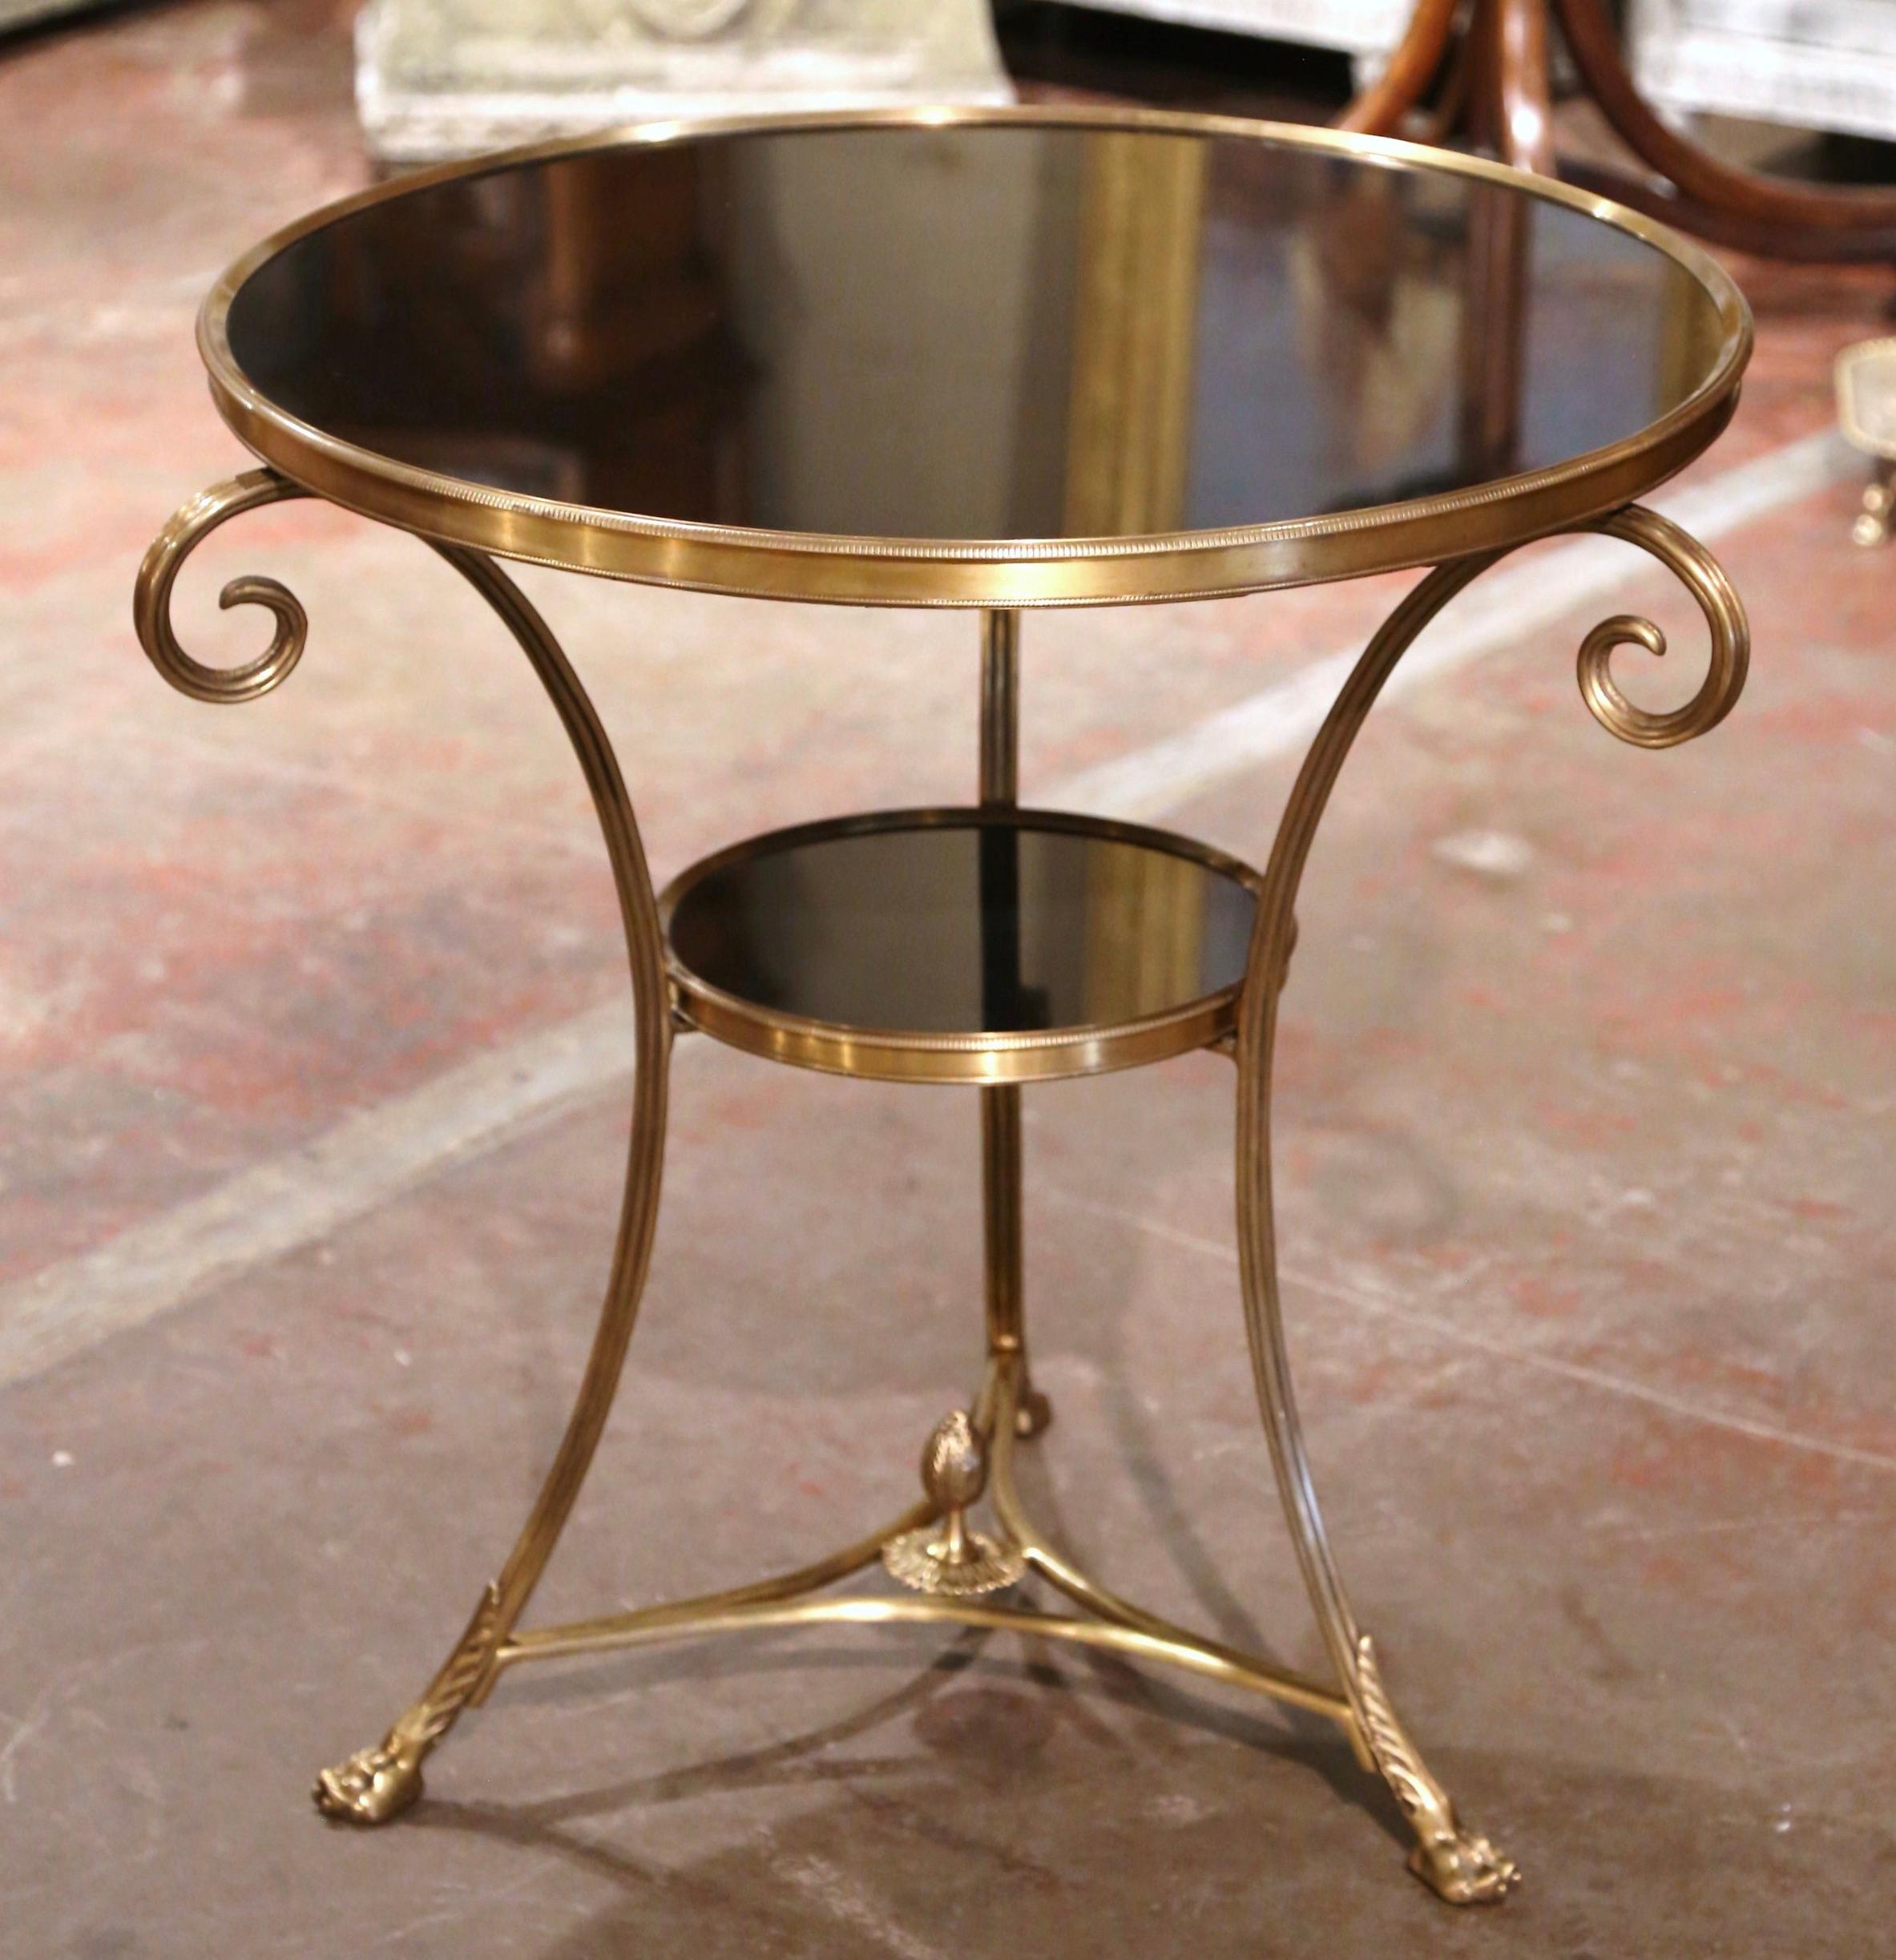 20th Century Mid-Century French Directoire Black Marble Top and Bronze Guéridon Table